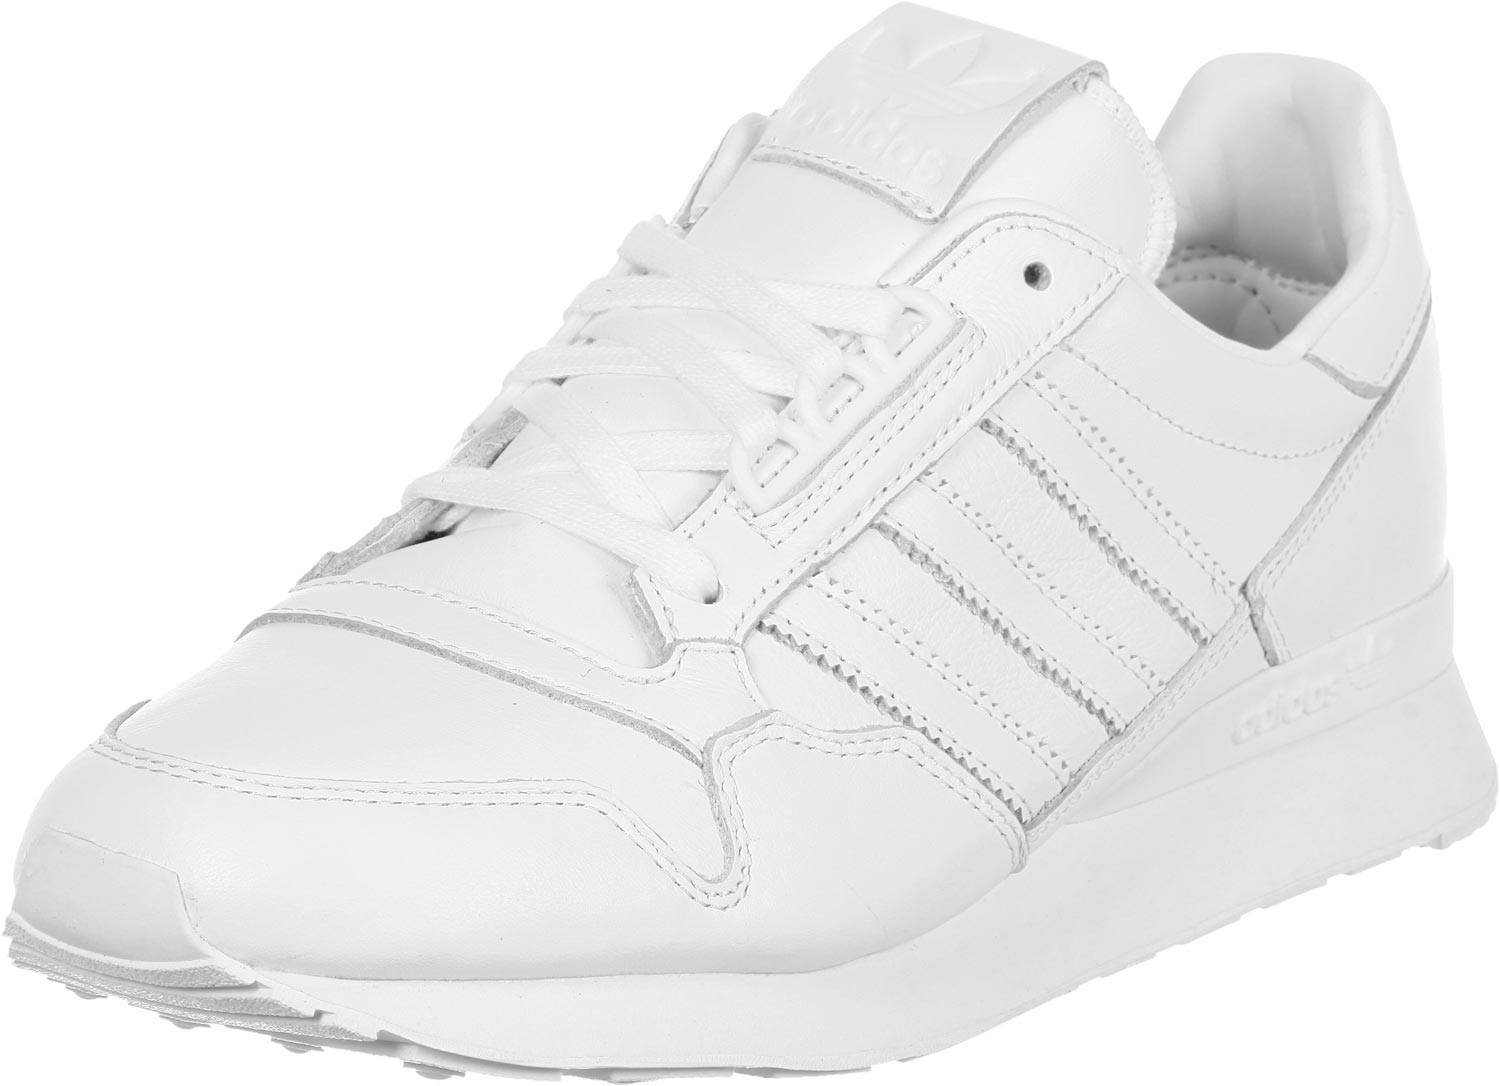 adidas zx 500 Blanche homme